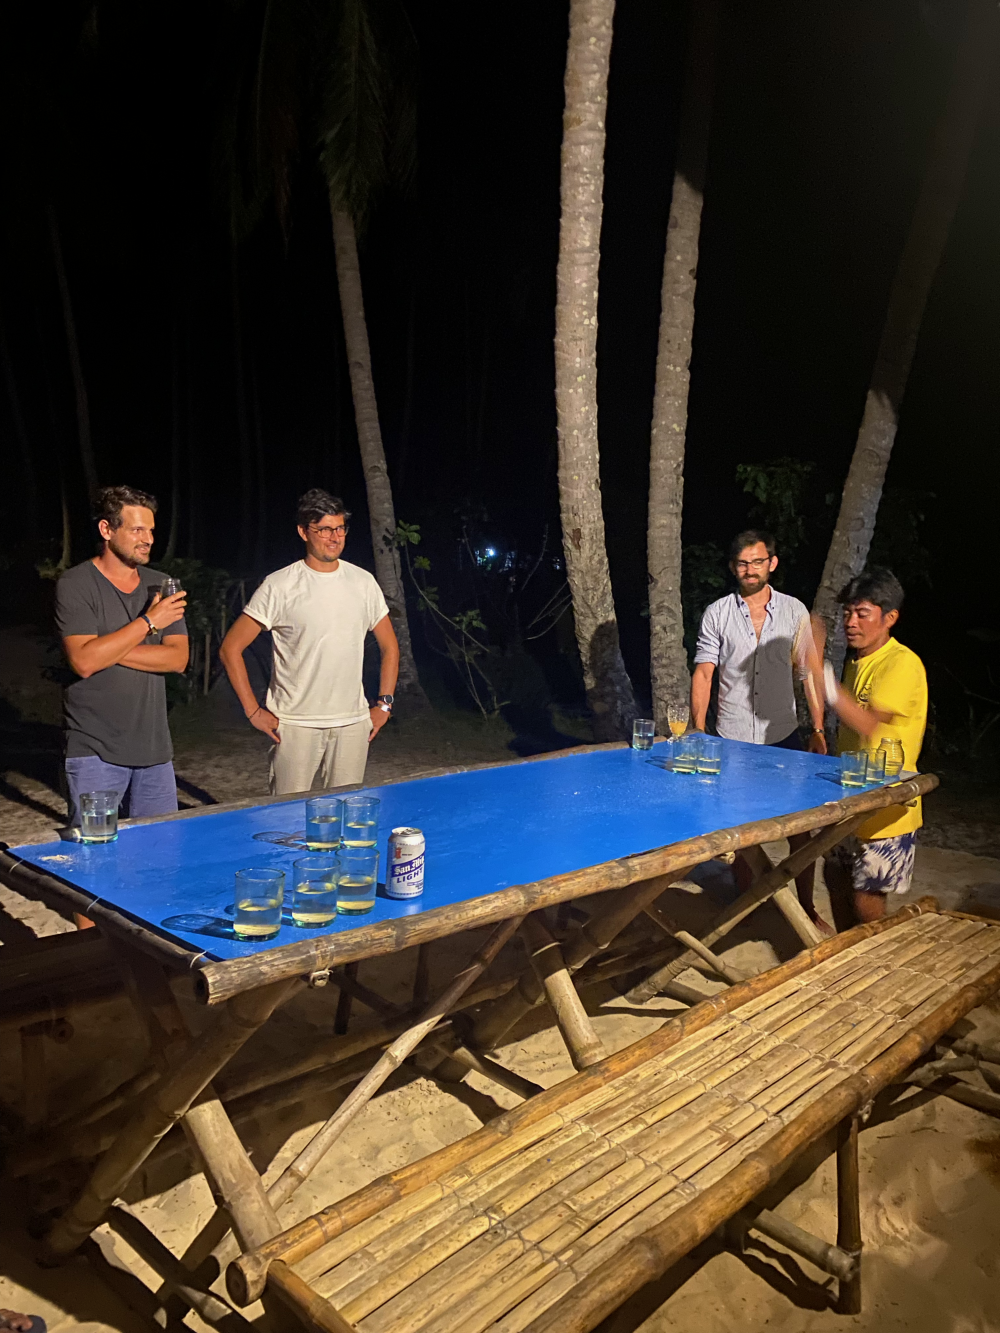 Drinking games in the evening at Tao Beach Farm